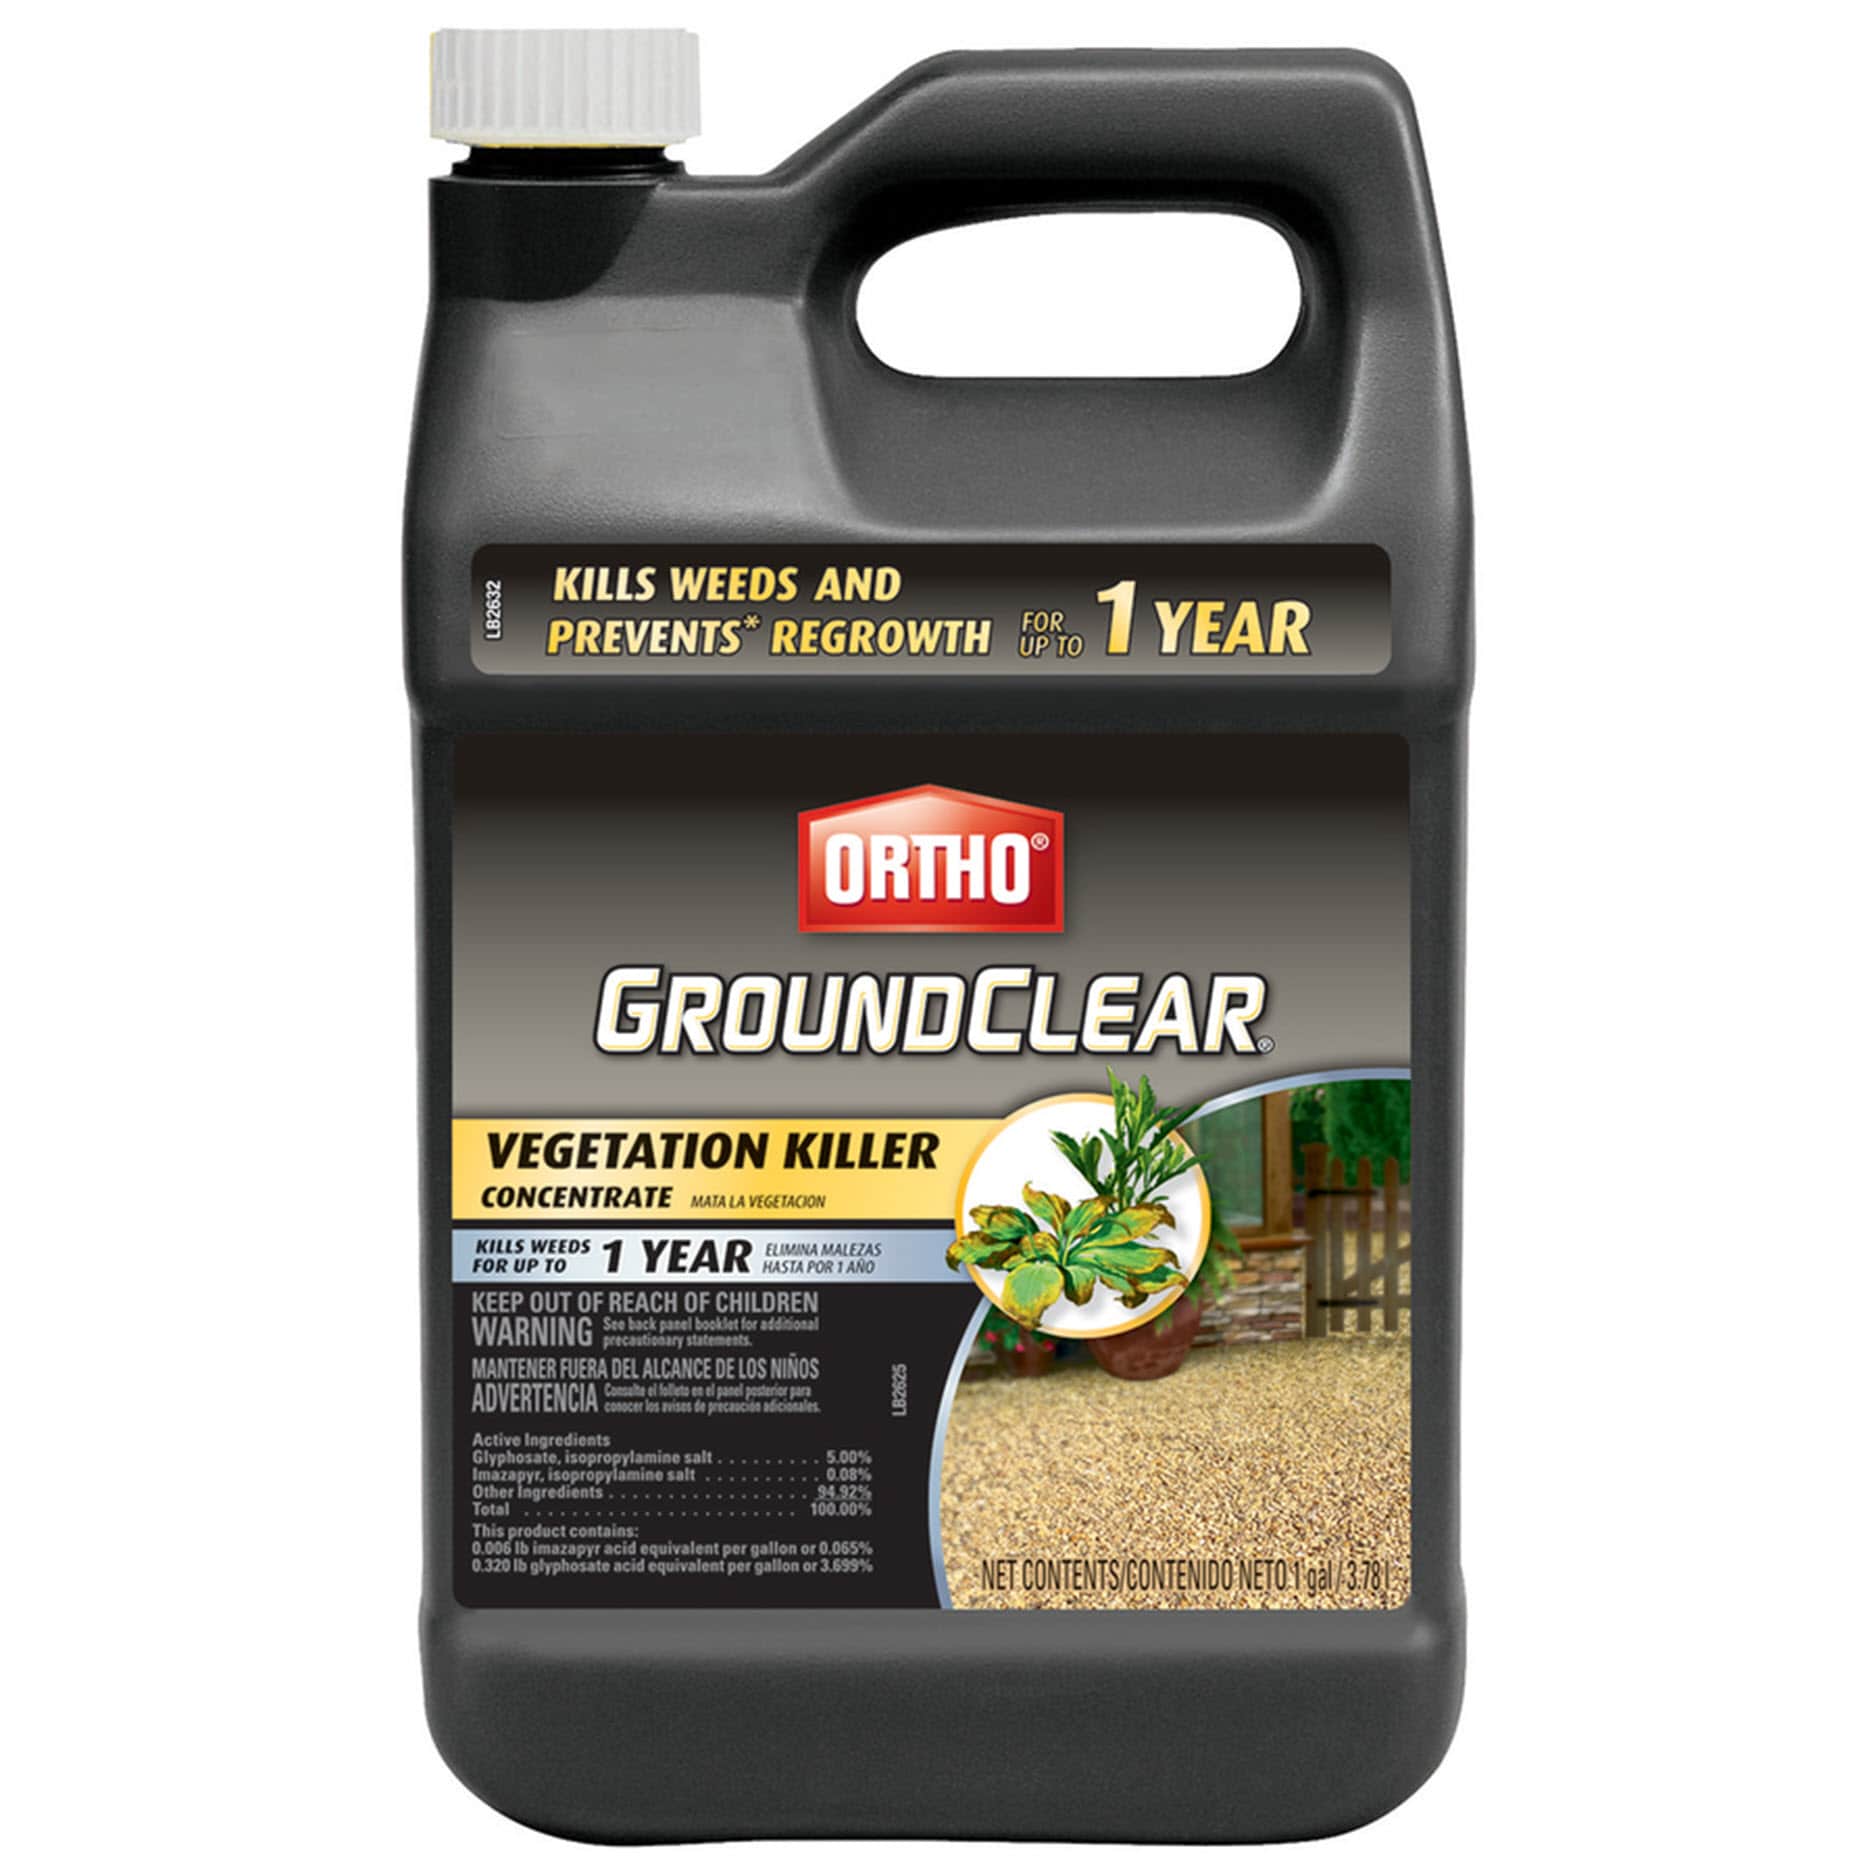 Image of Ortho Ground Clear Weed Killer for driveway